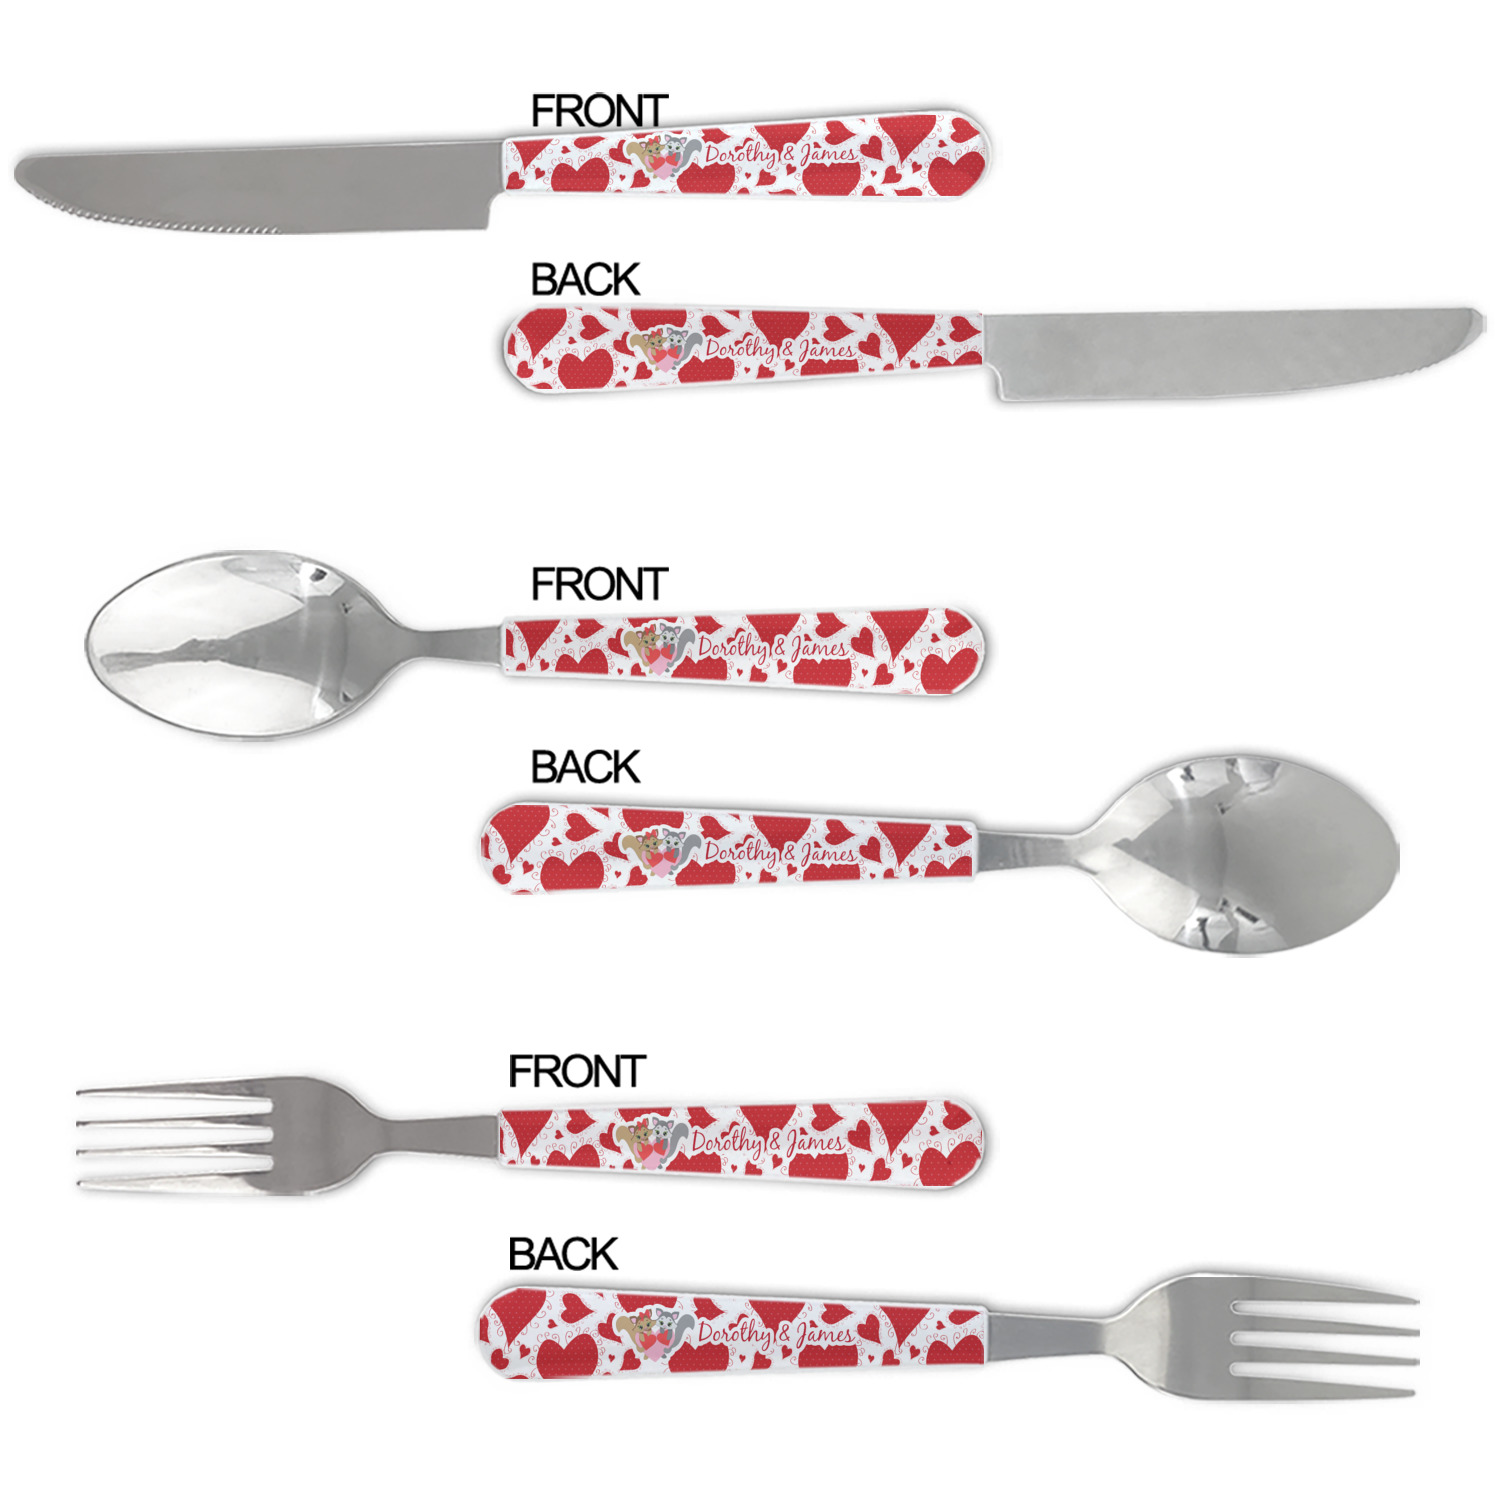 https://www.youcustomizeit.com/common/MAKE/200617/Cute-Squirrel-Couple-Cutlery-Set-APPROVAL.jpg?lm=1625688815